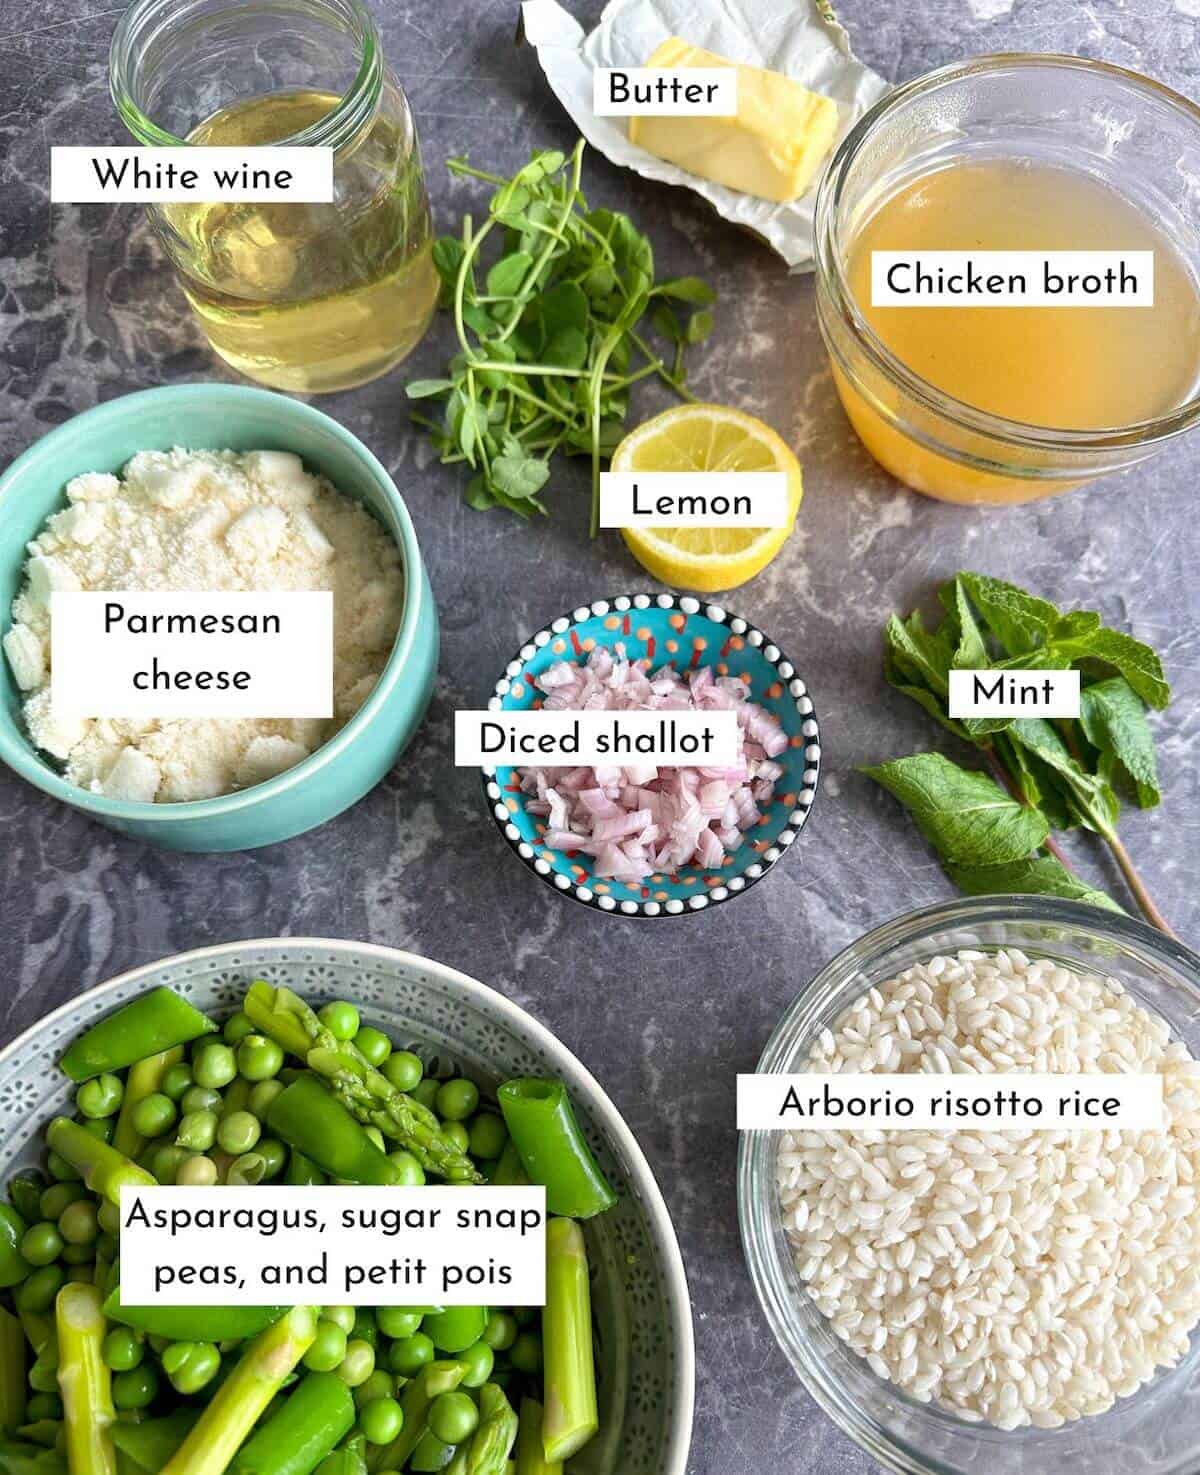 Ingredients for Spring risotto. Asparagus, peas, sugar snap peas, lemon, rice, broth, wine, parmesan cheese and mint on a worktop. 